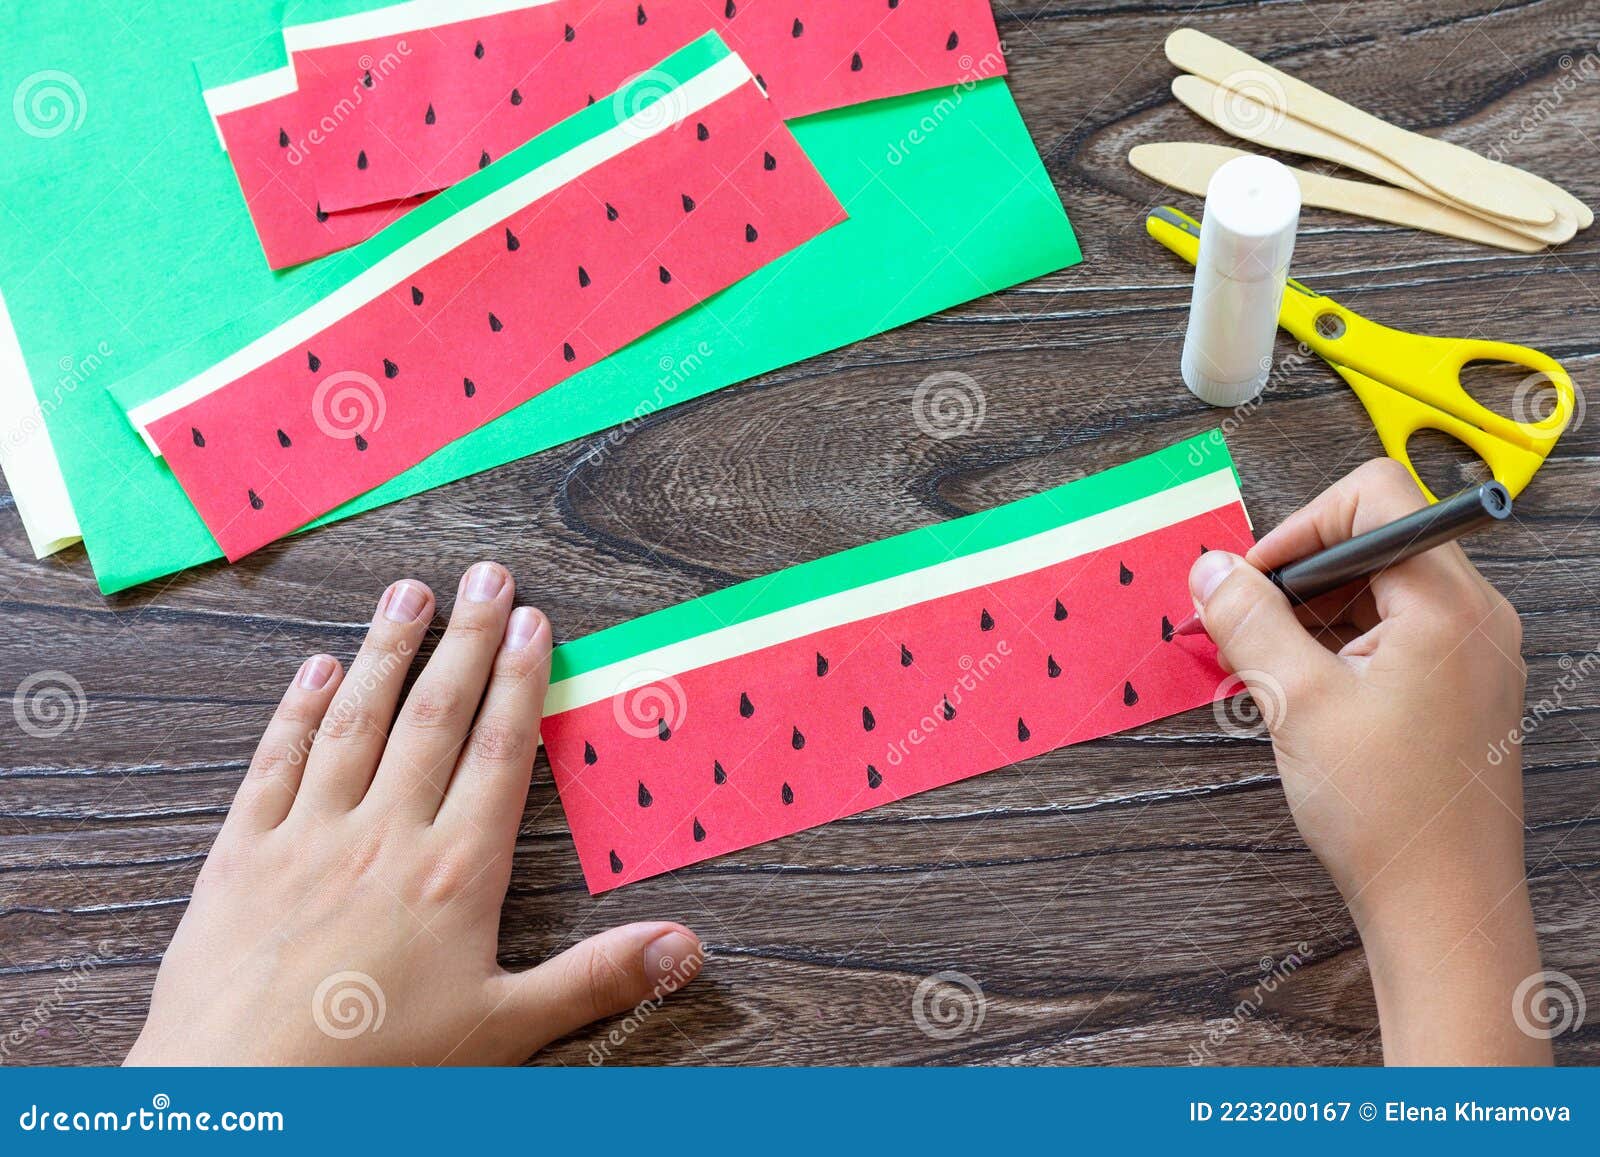 3. Step-by-Step Watermelon Nail Tutorial - wide 10